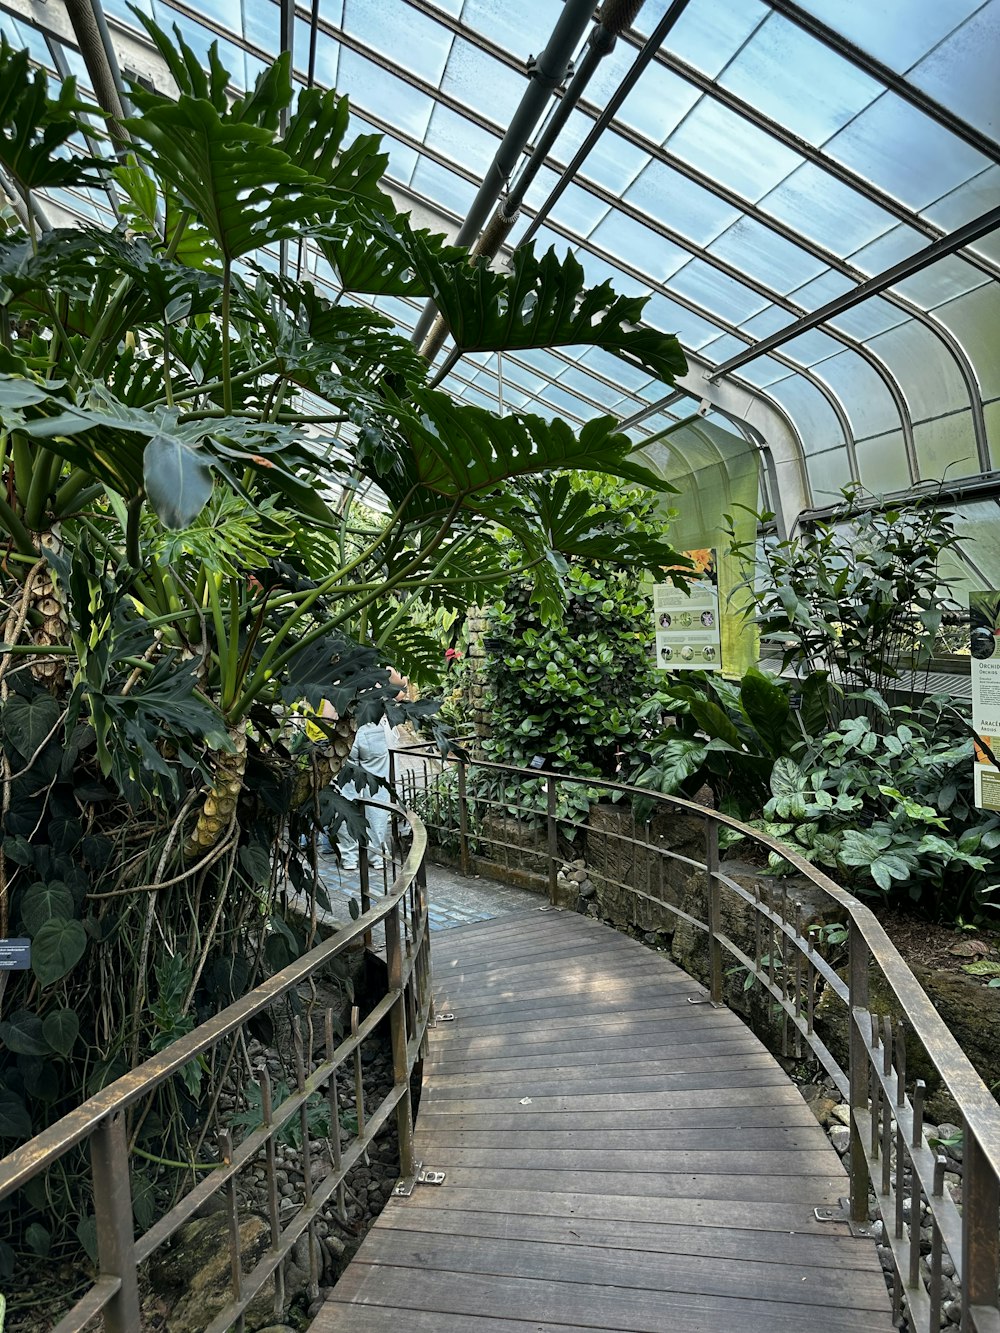 a wooden walkway in a greenhouse with lots of plants